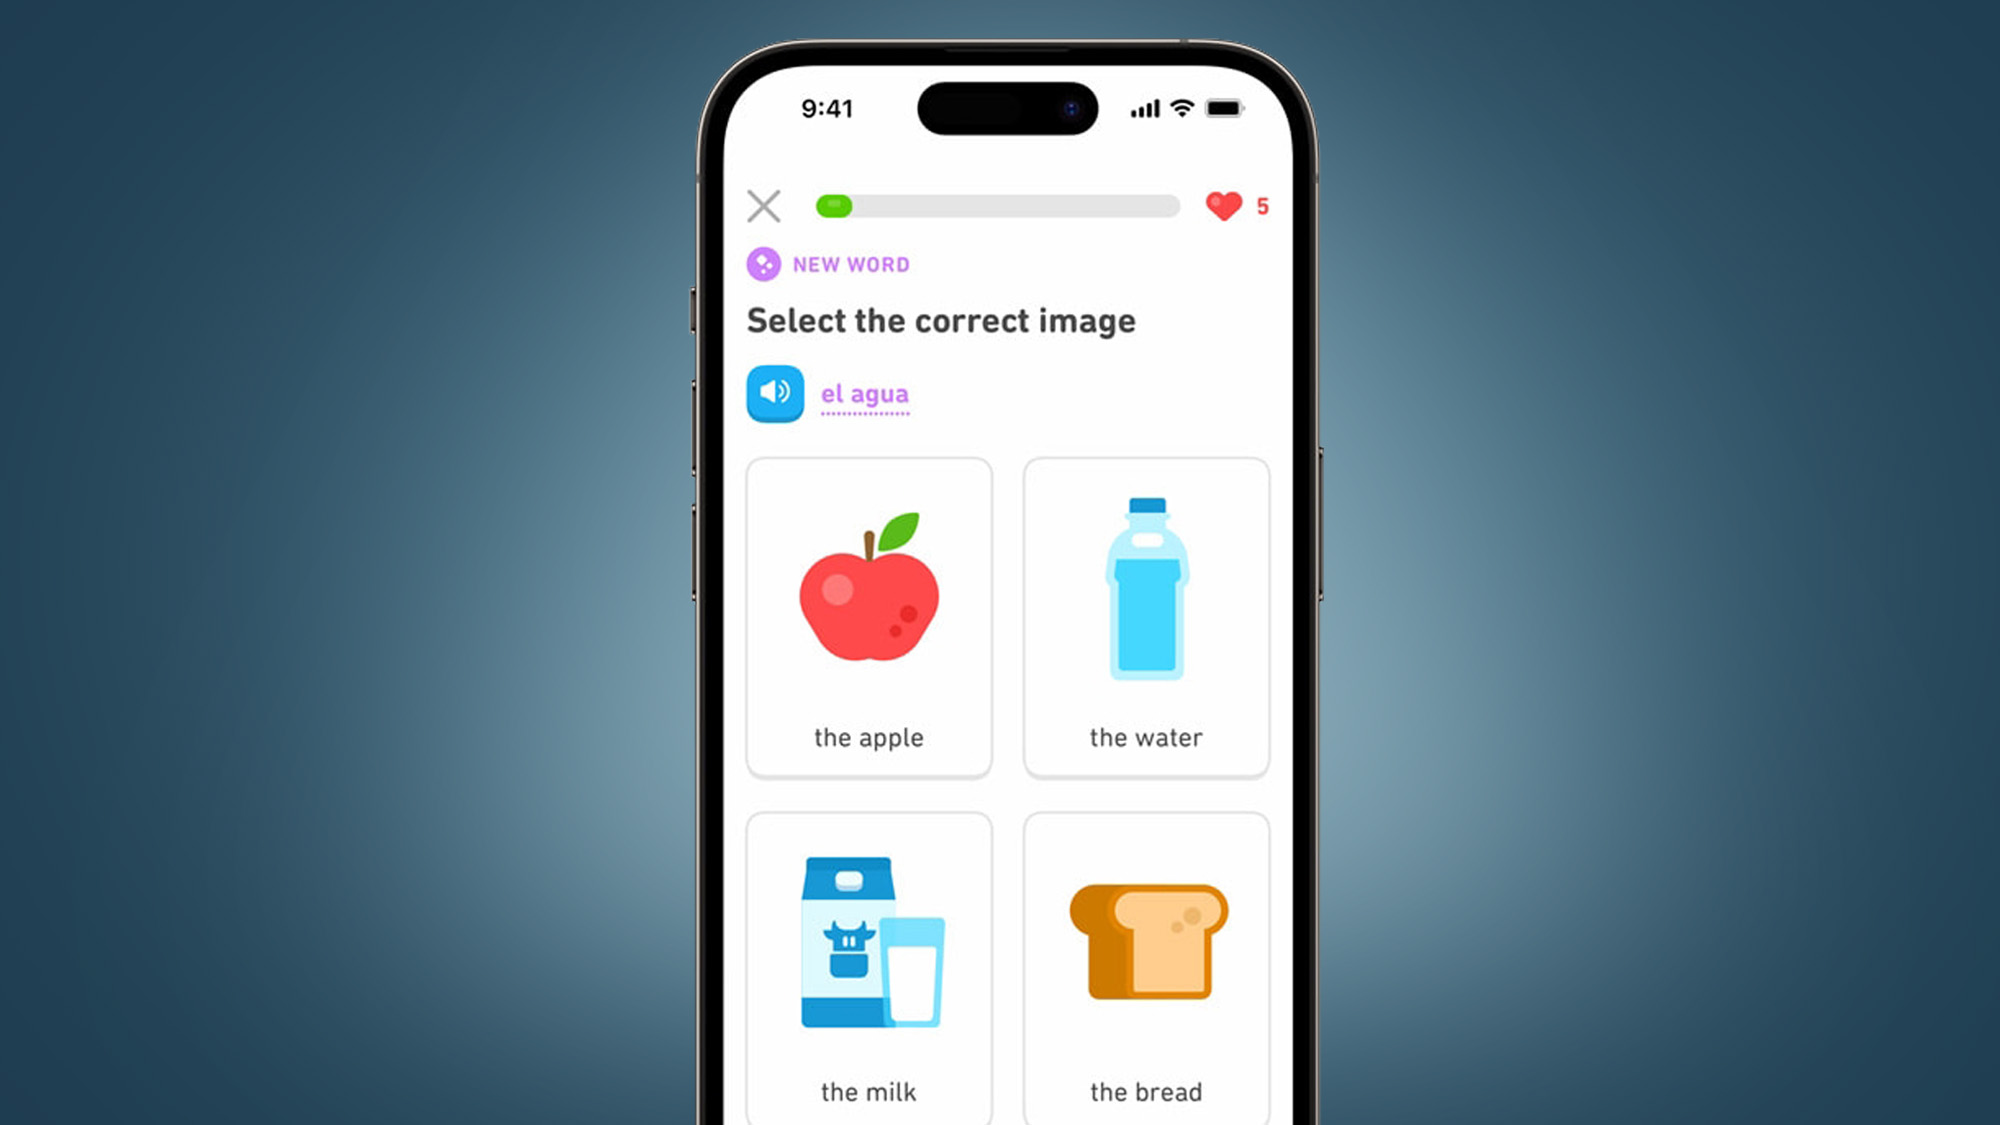 Phone on a blue background showing the Duolingo app